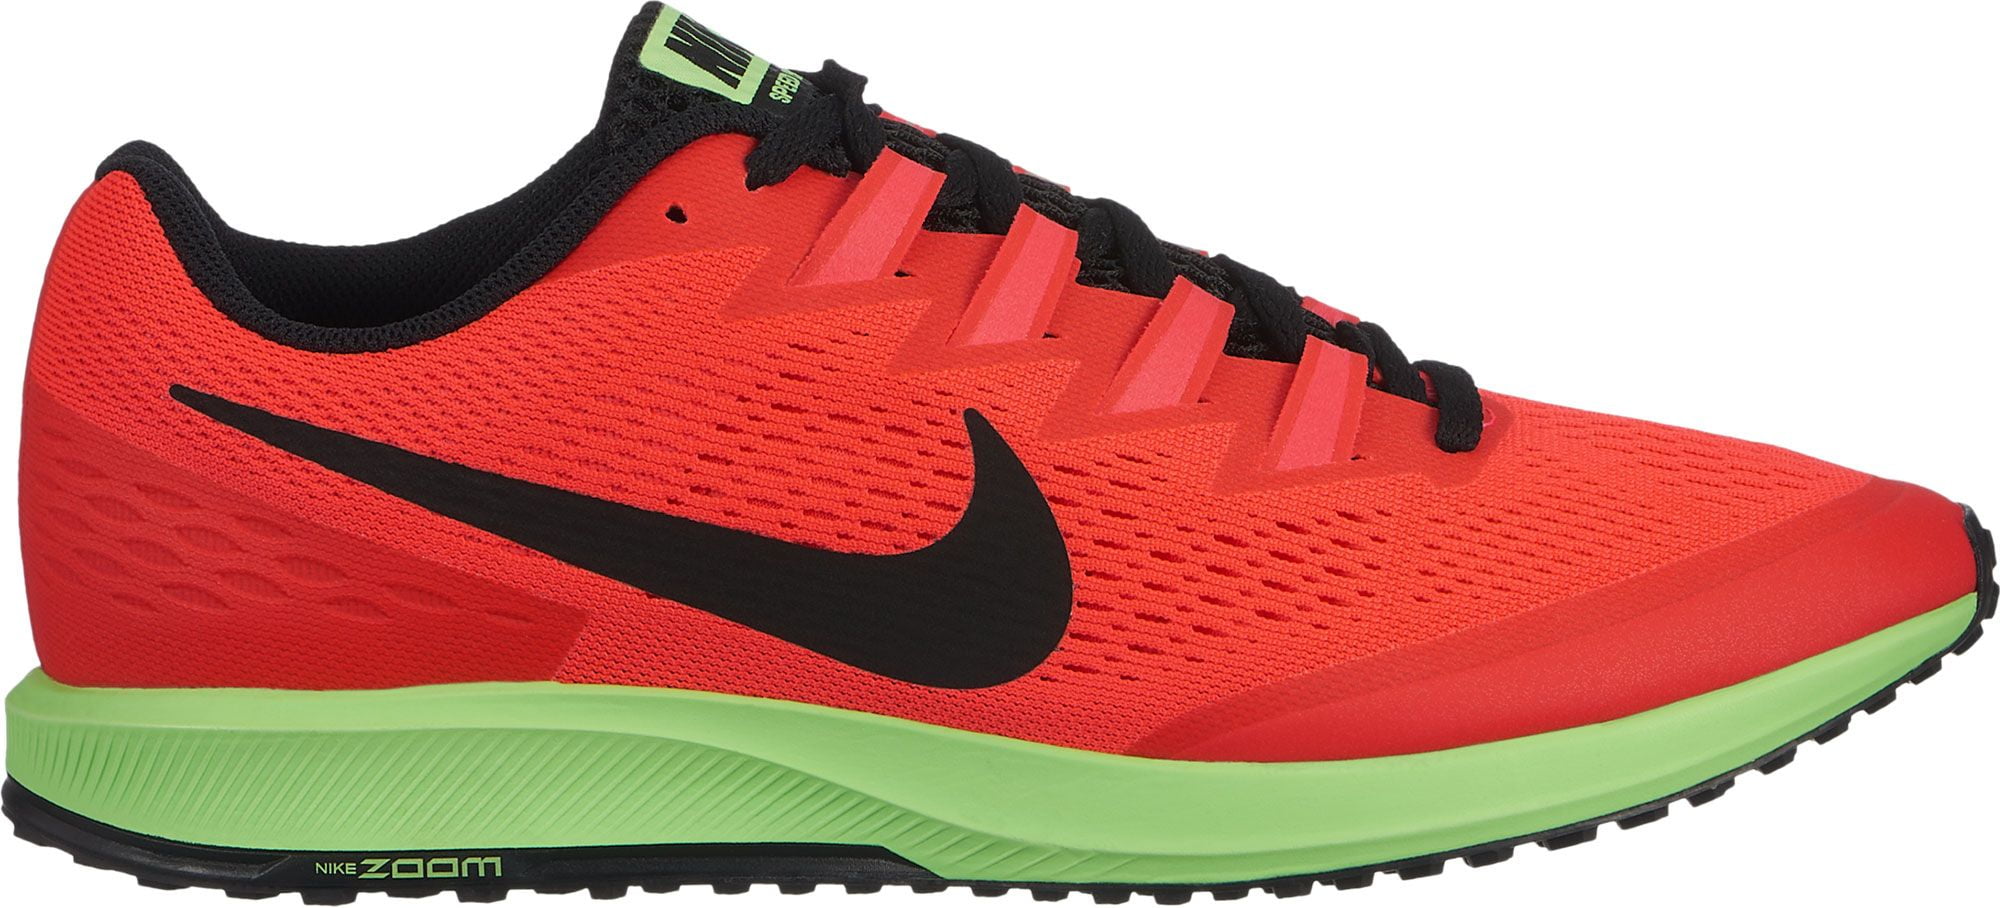 nike zoom speed rival 6 cross country shoes